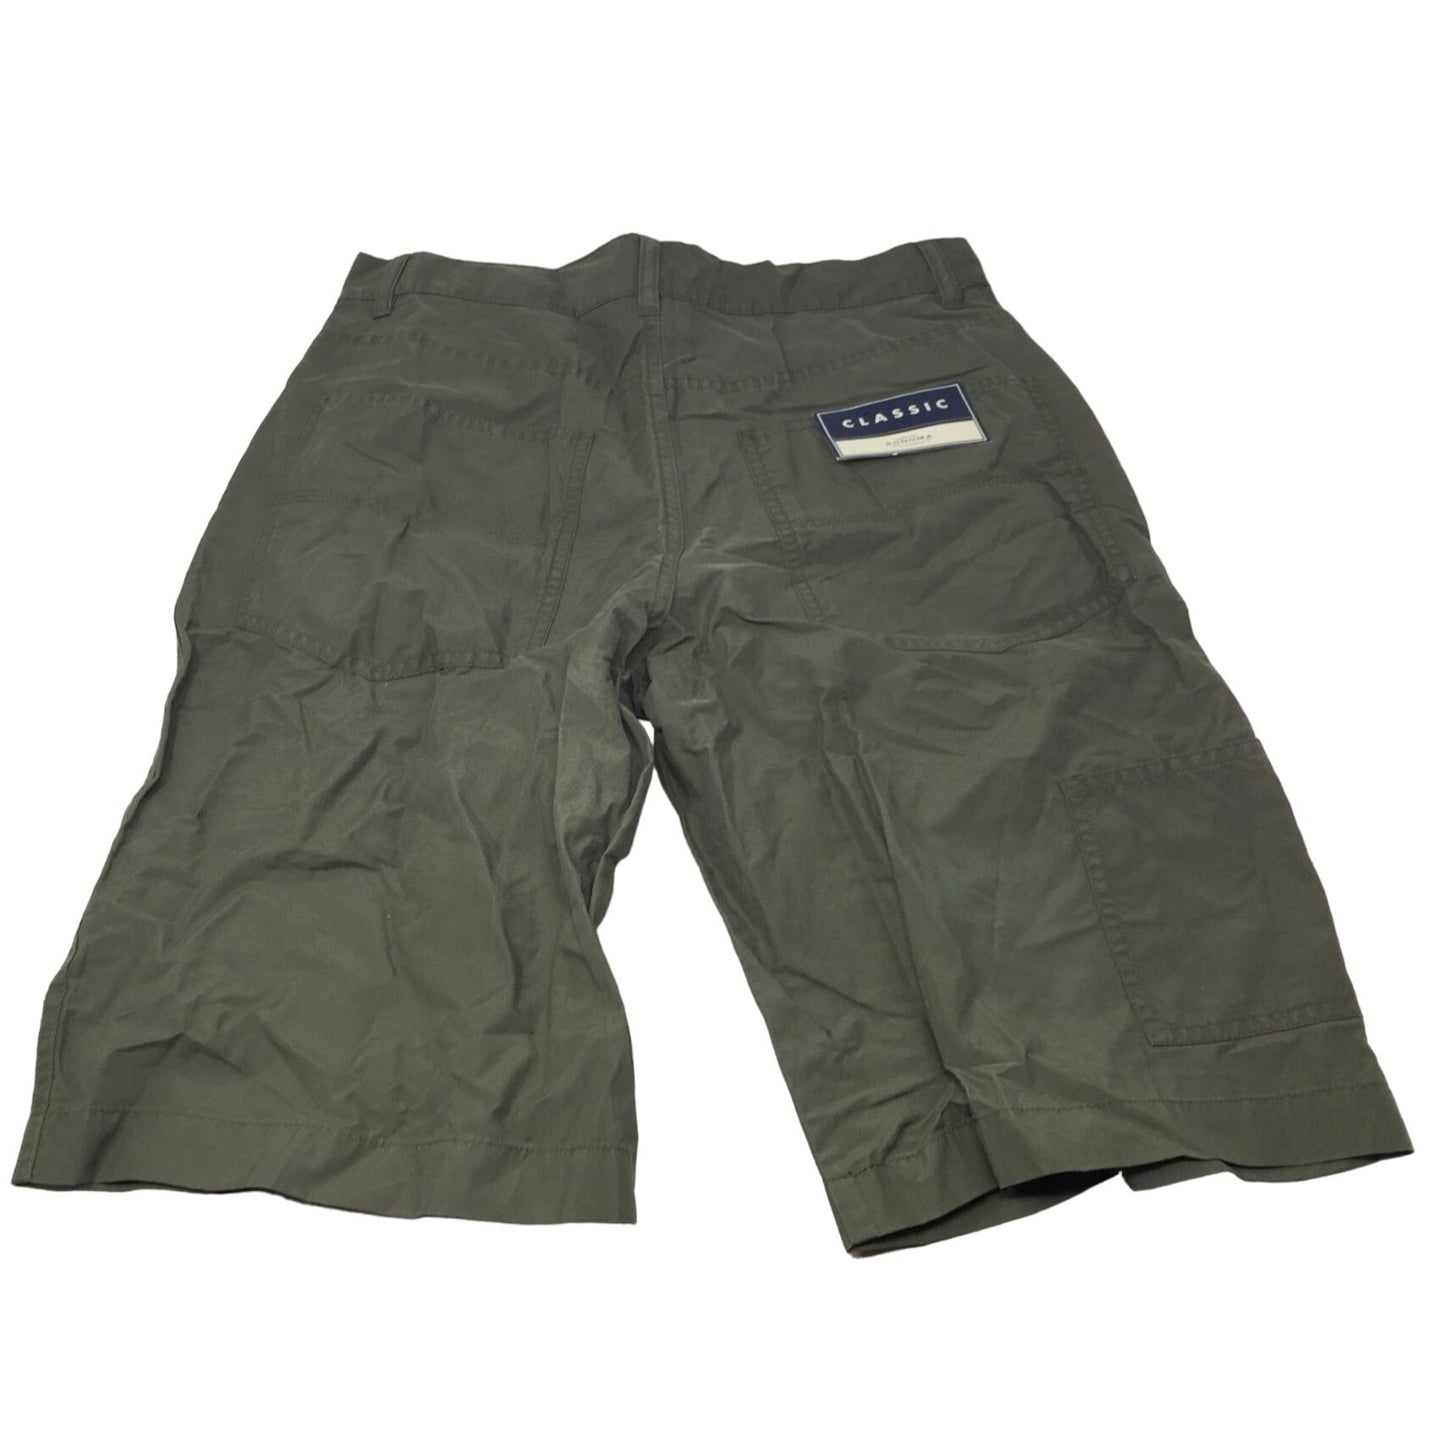 Boys Sonoma Olive Green Cargo Shorts Size 32 Husky New with Tags